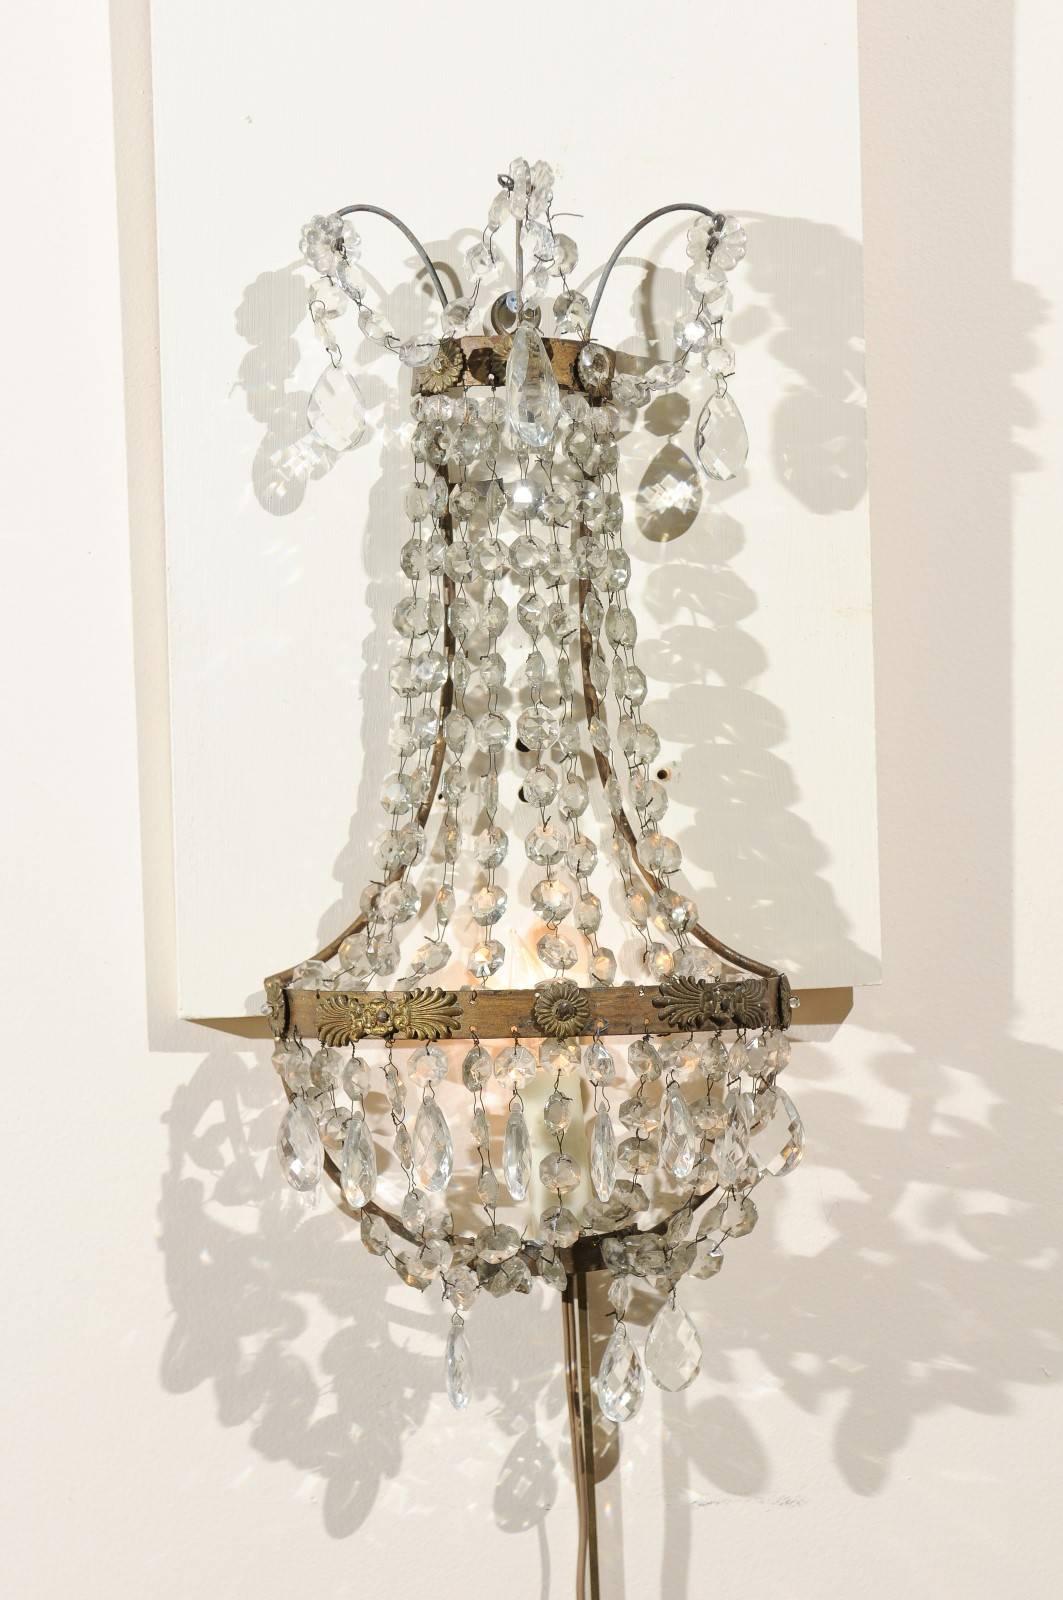 Italian Pair of Crystal Basket Sconces with One-Light, 20th Century, Italy